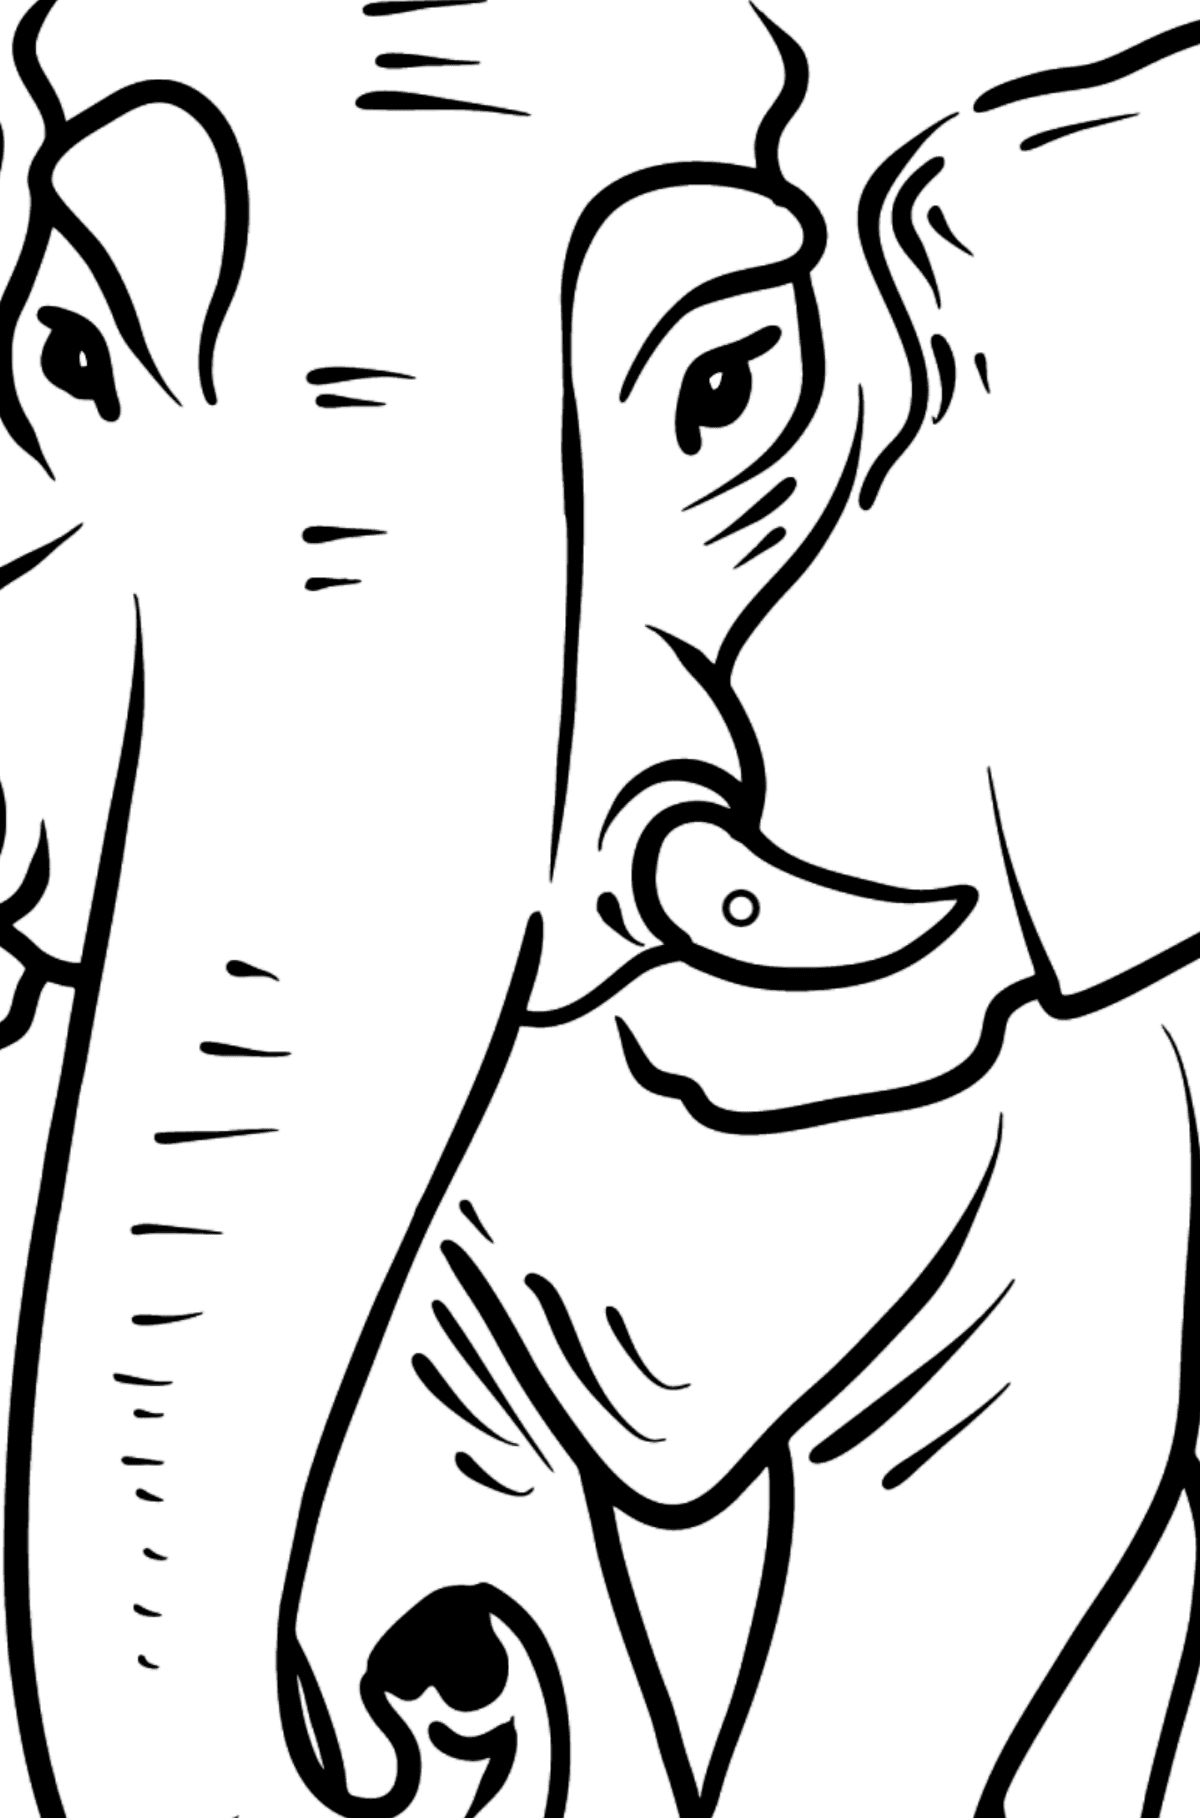 Elephant coloring page - Coloring by Geometric Shapes for Kids